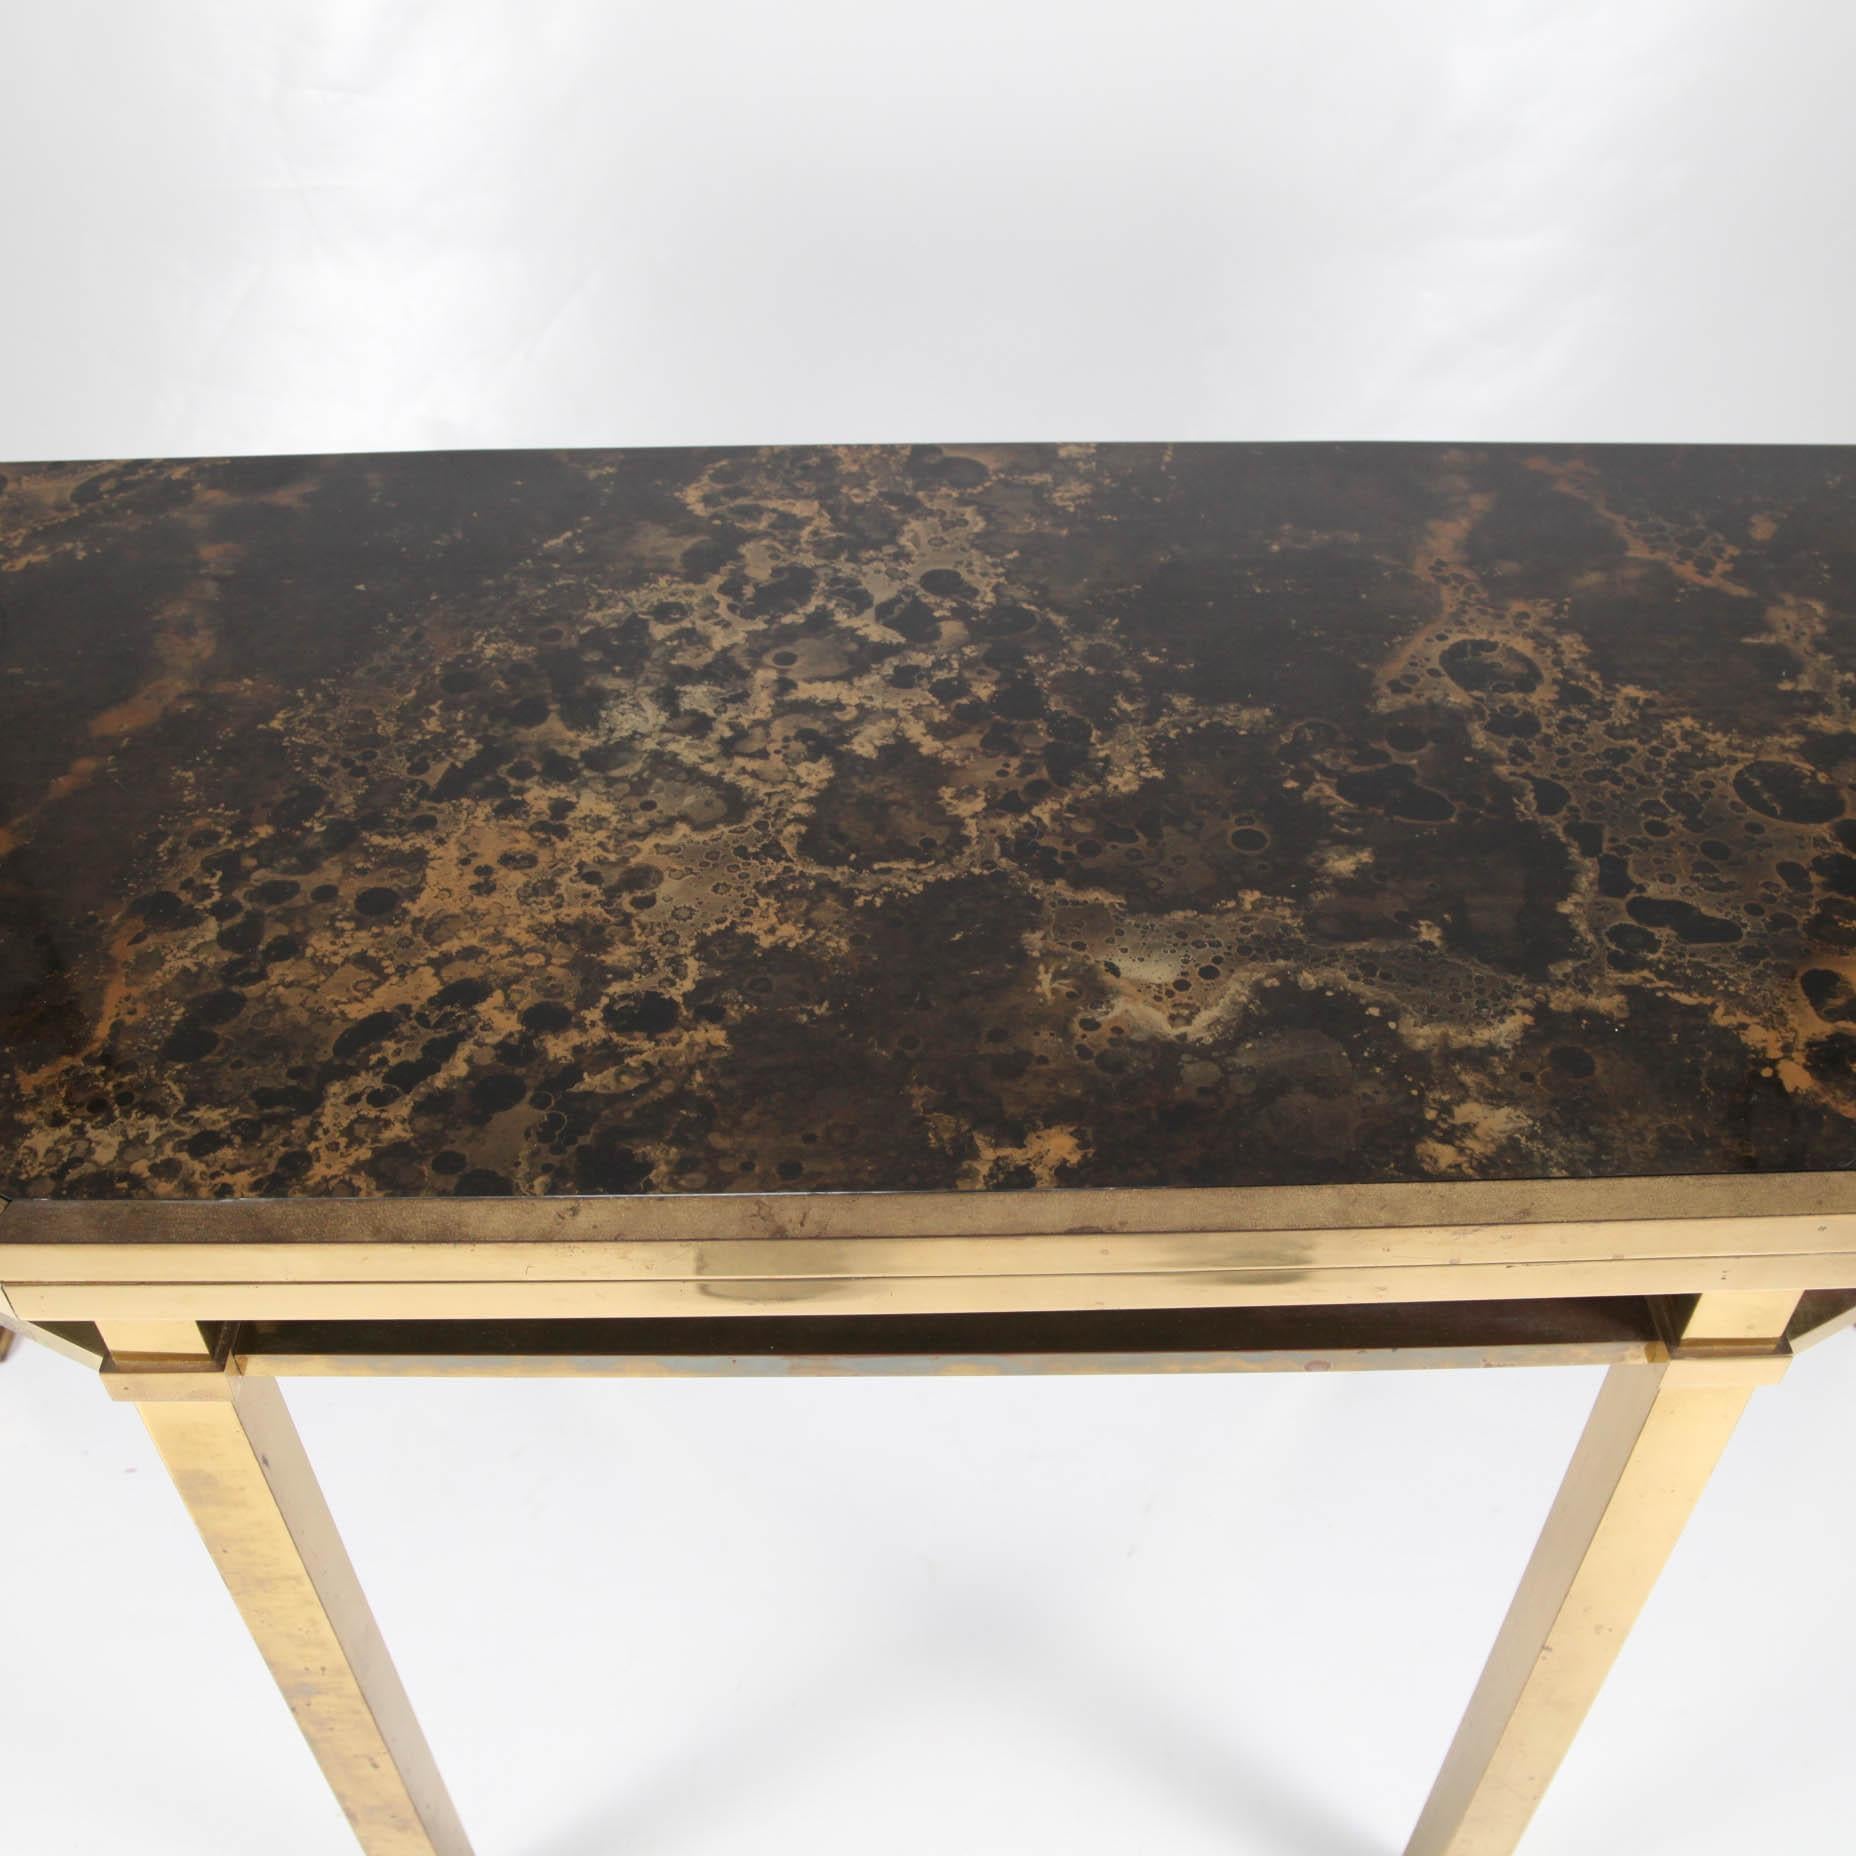 Large convertible console table by Maison Jansen circa 1970 with brass legs and stratified top. When closed, you will have stratified work with brown and gold color which is an unique technique to immitate lacqured effect that Maison Jansen use for